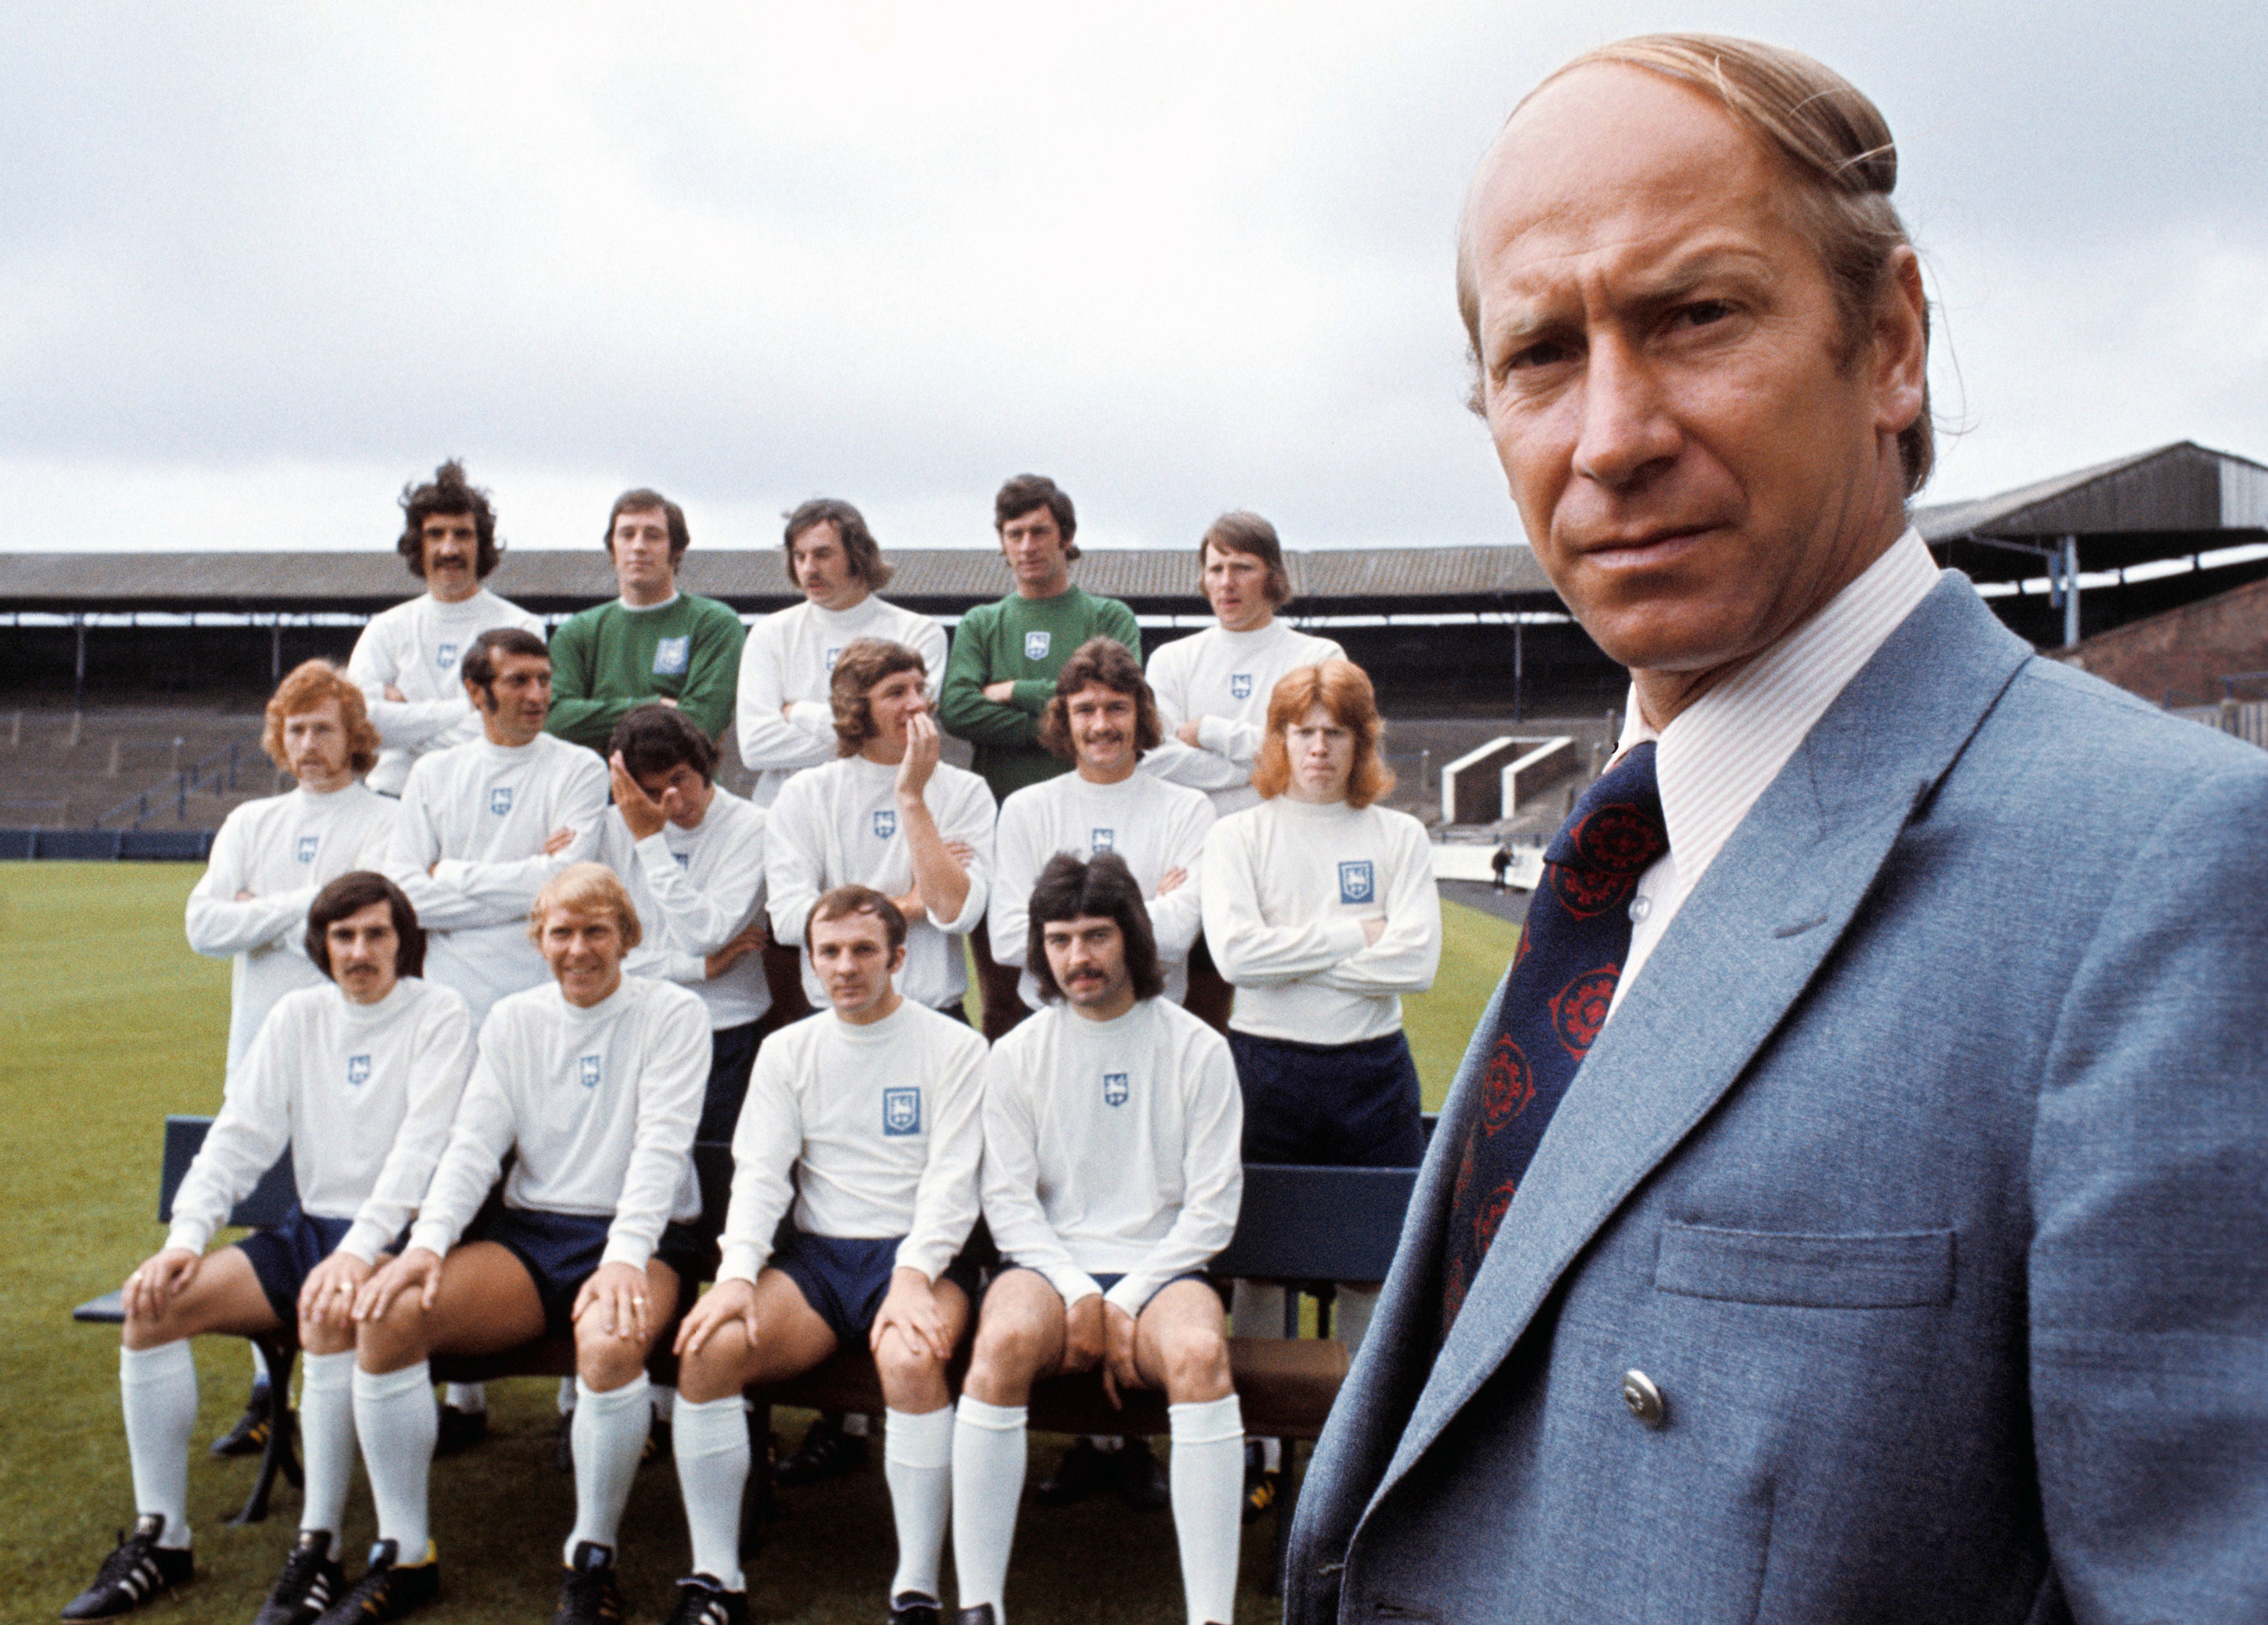 Starting what was to be a short-lived managerial career with Preston, July 1973